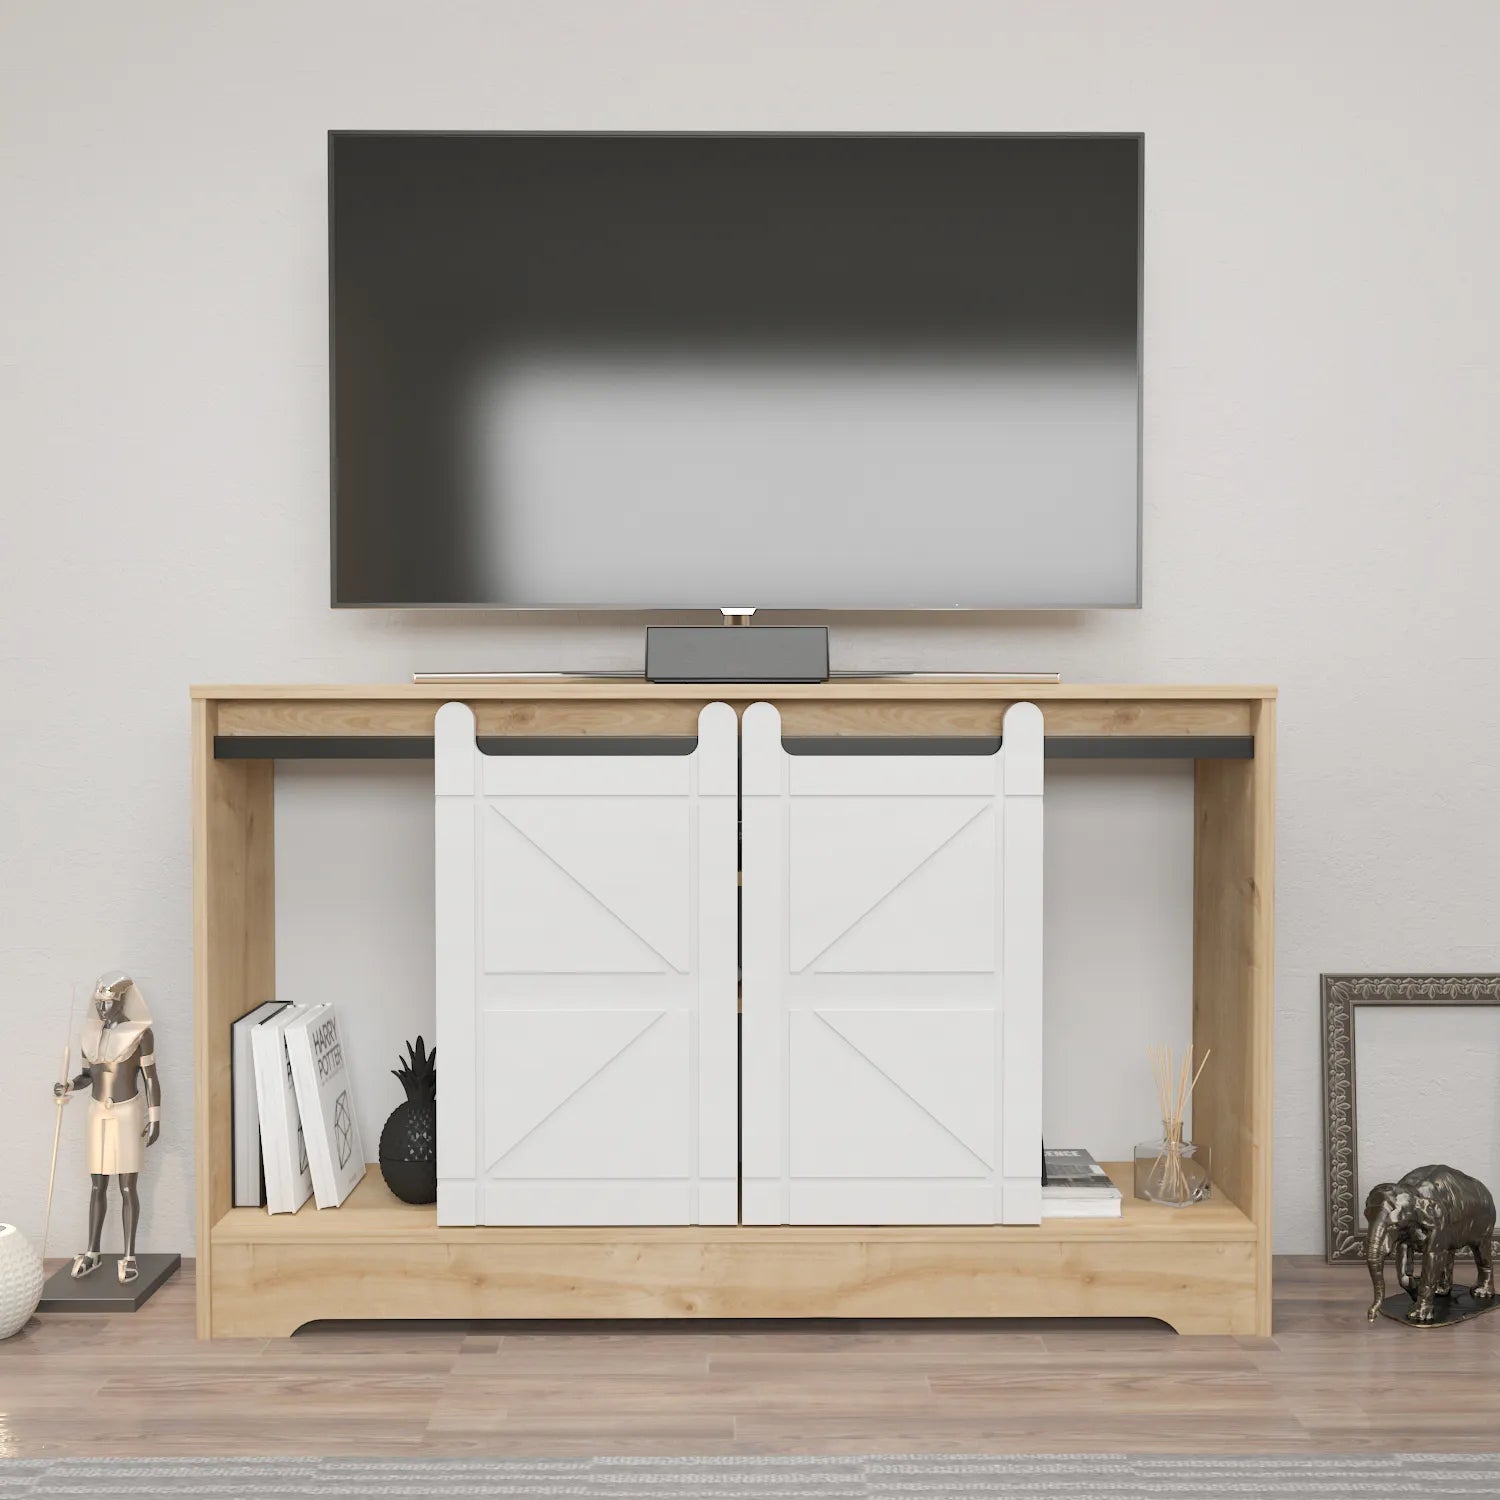 Ahris 55 inch Wide TV Stand Media Console with Sliding Barn Doors for TVs up to 65 inch